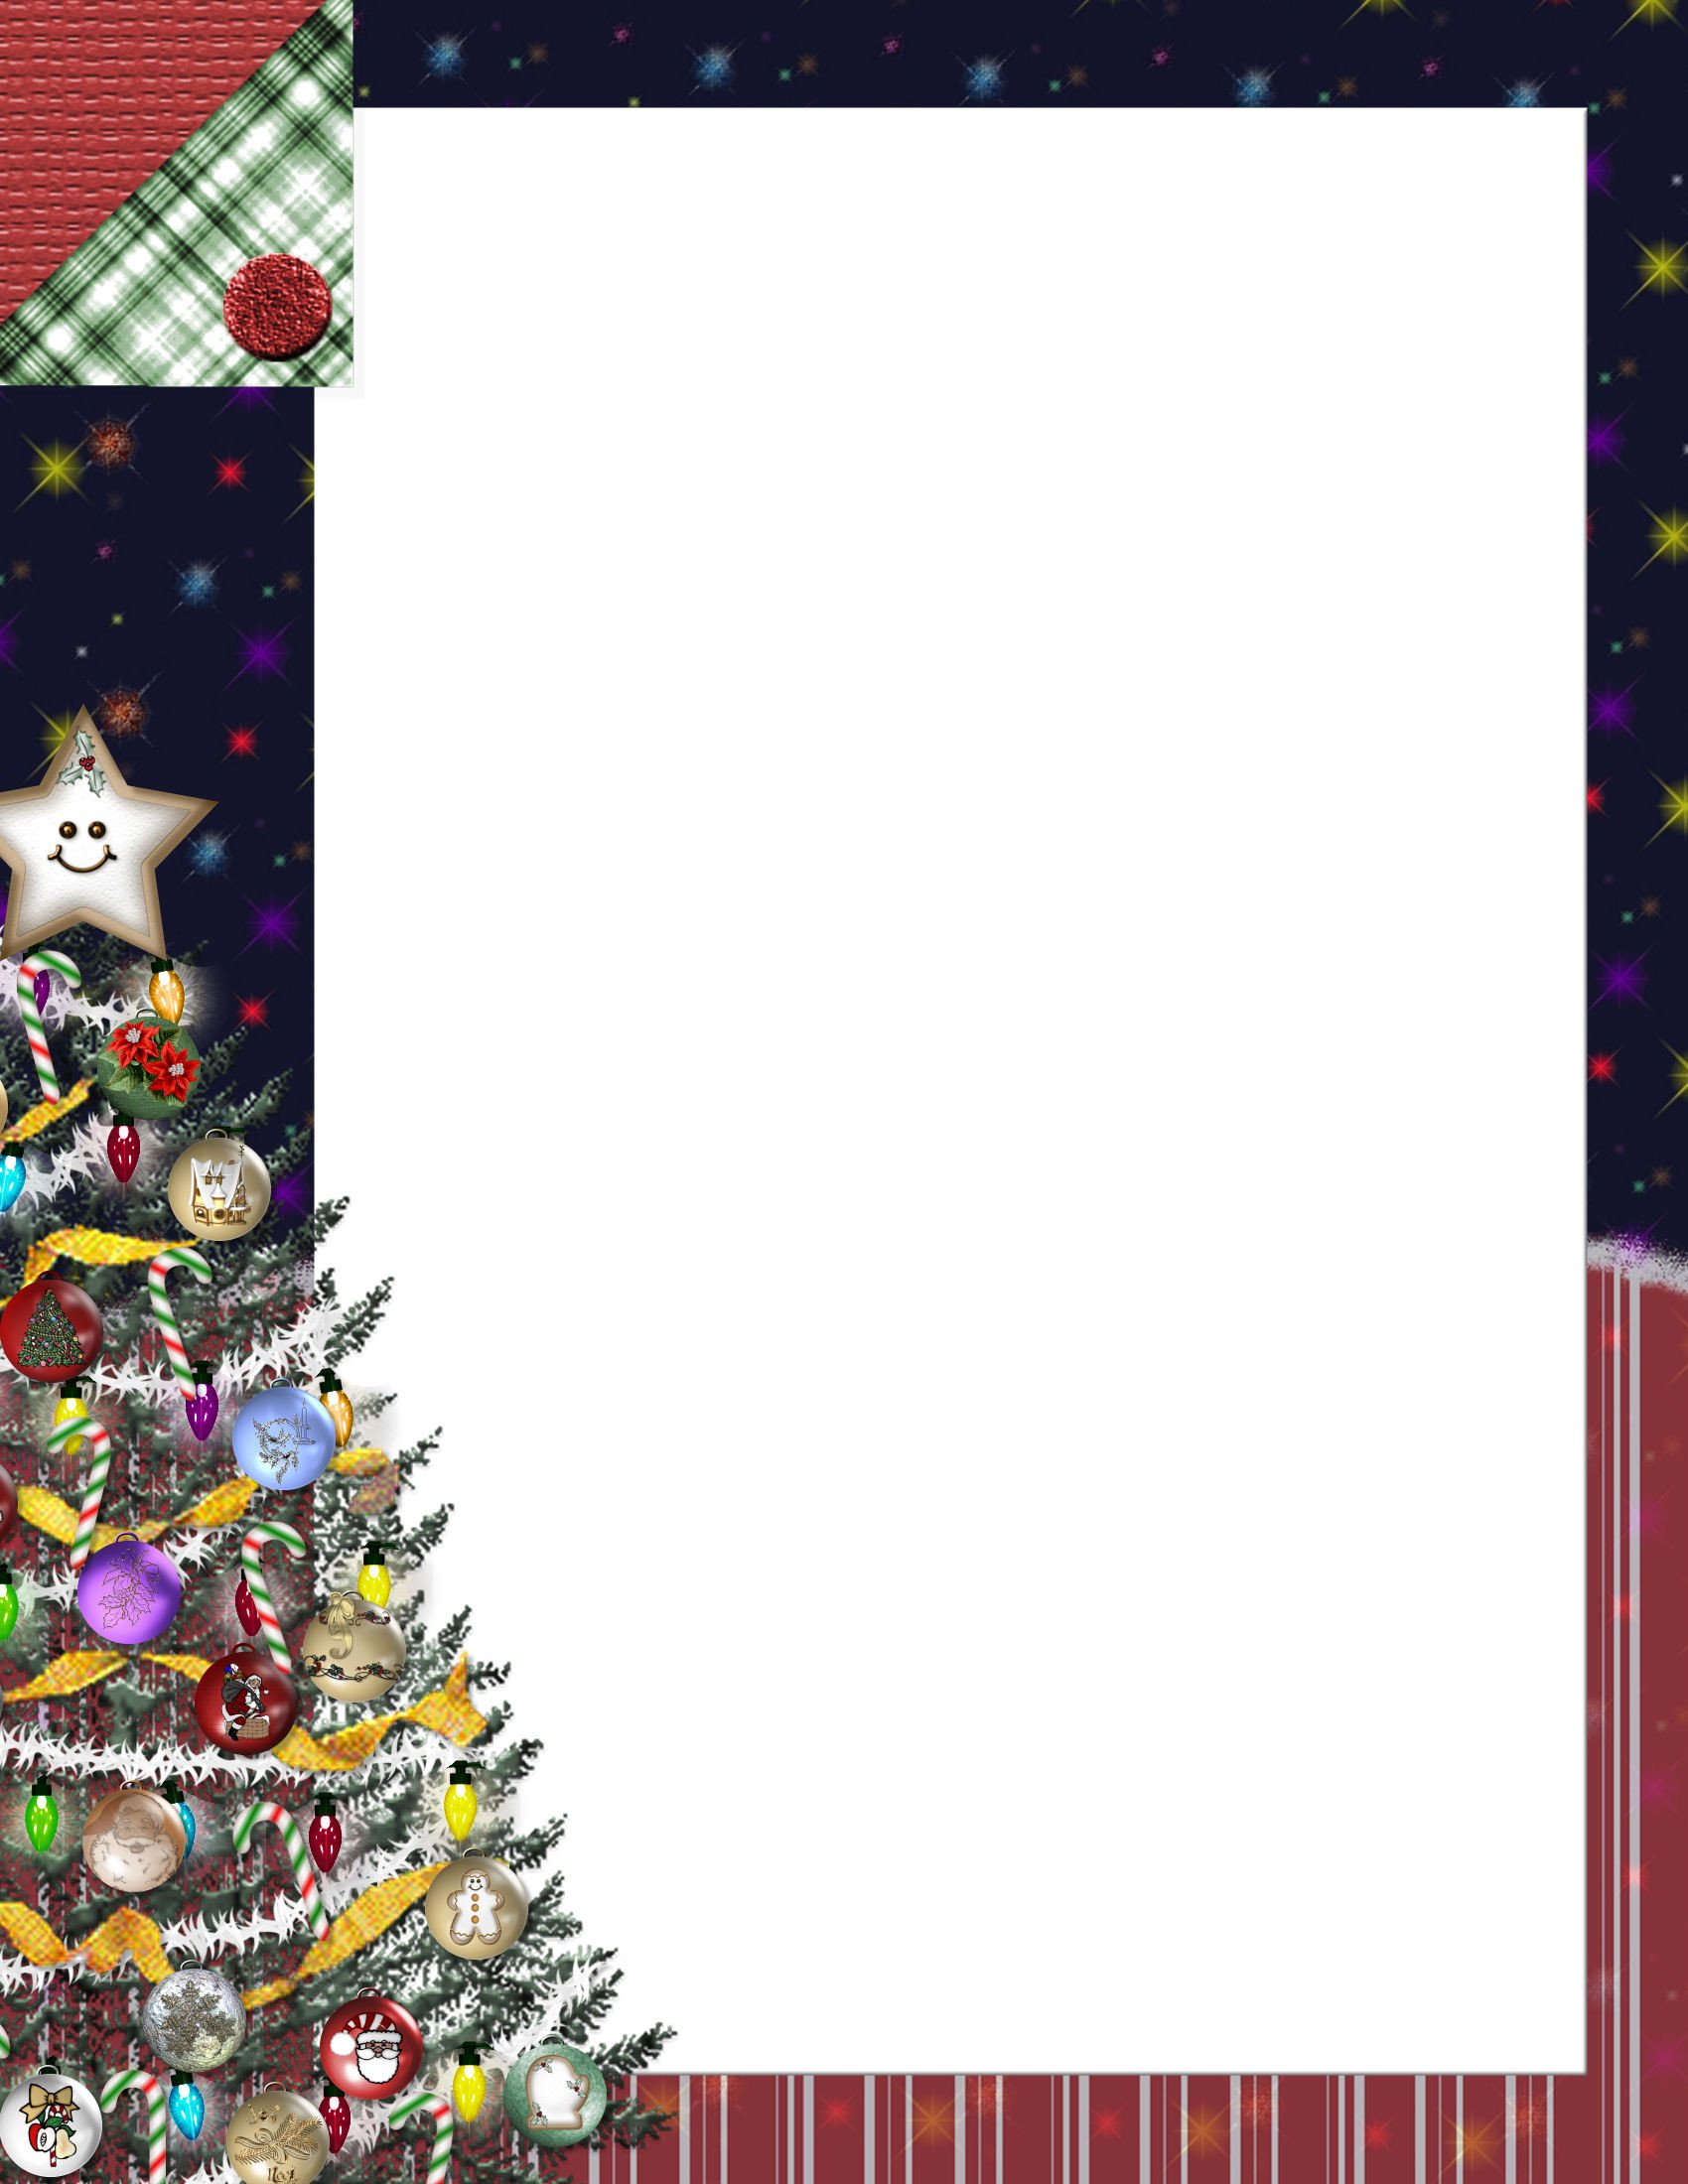 Christmas 1 FREE Stationery Template Downloads